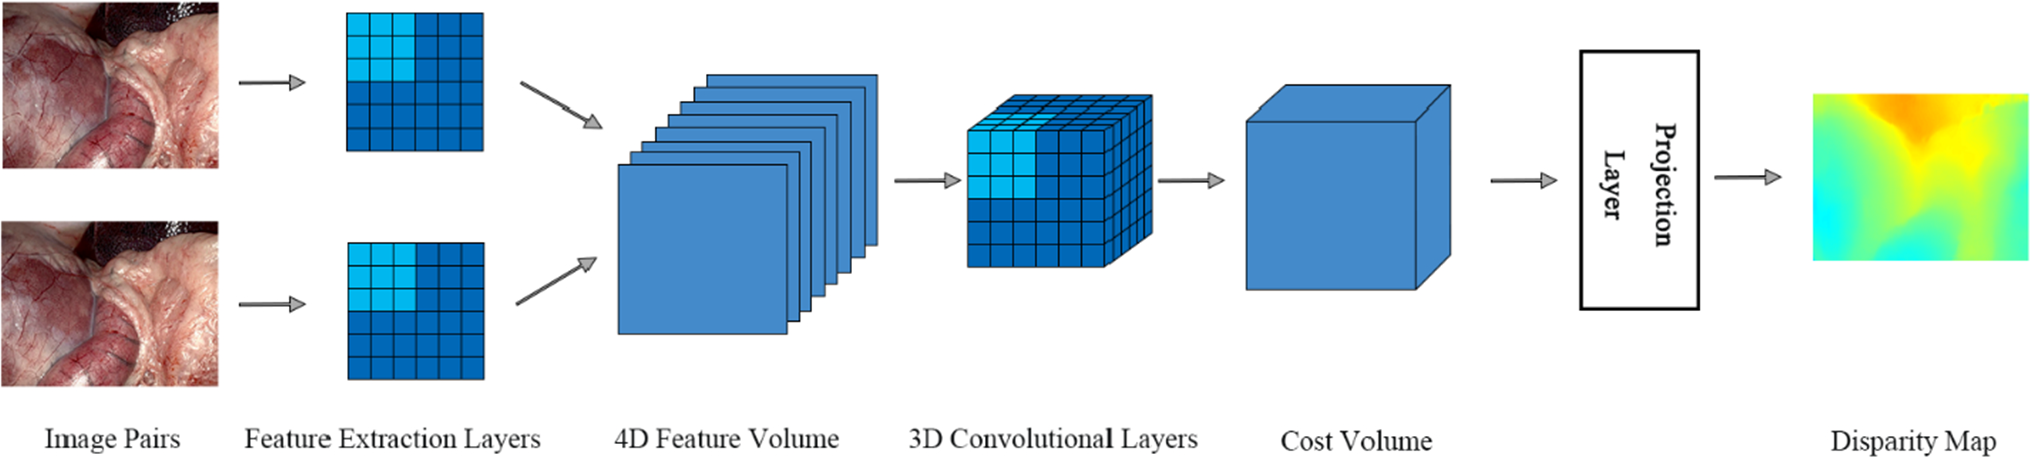 Stereo matching of binocular laparoscopic images with improved densely connected neural architecture search